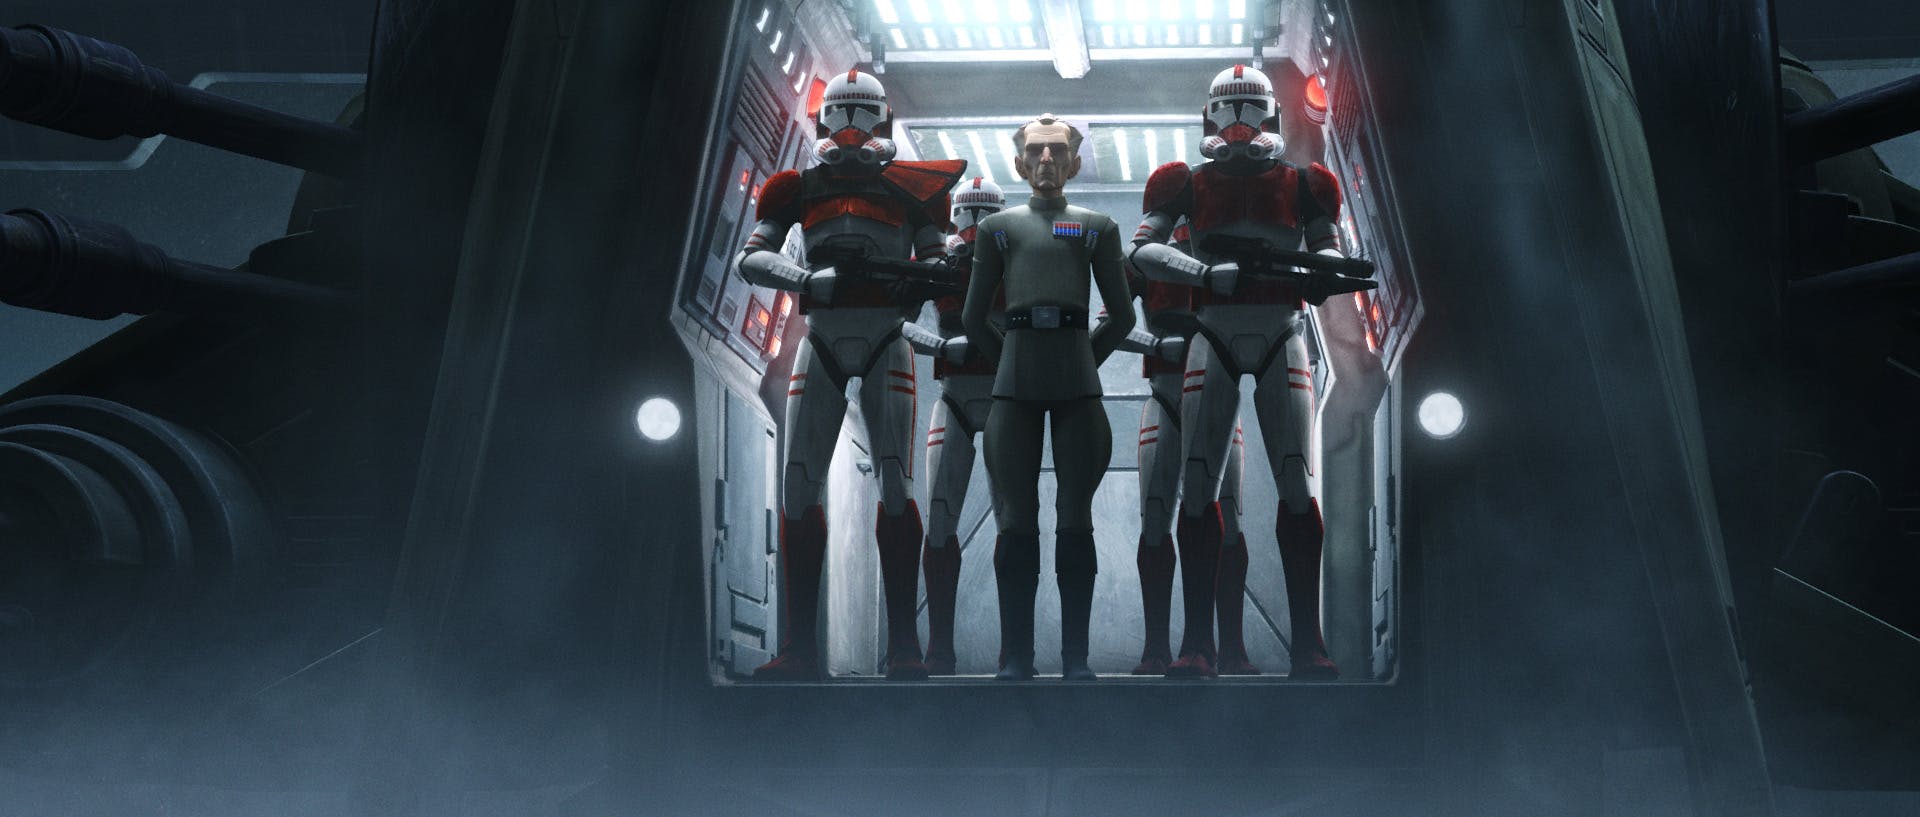 grand moff tarkin flagged by clone troopers in the bad batch